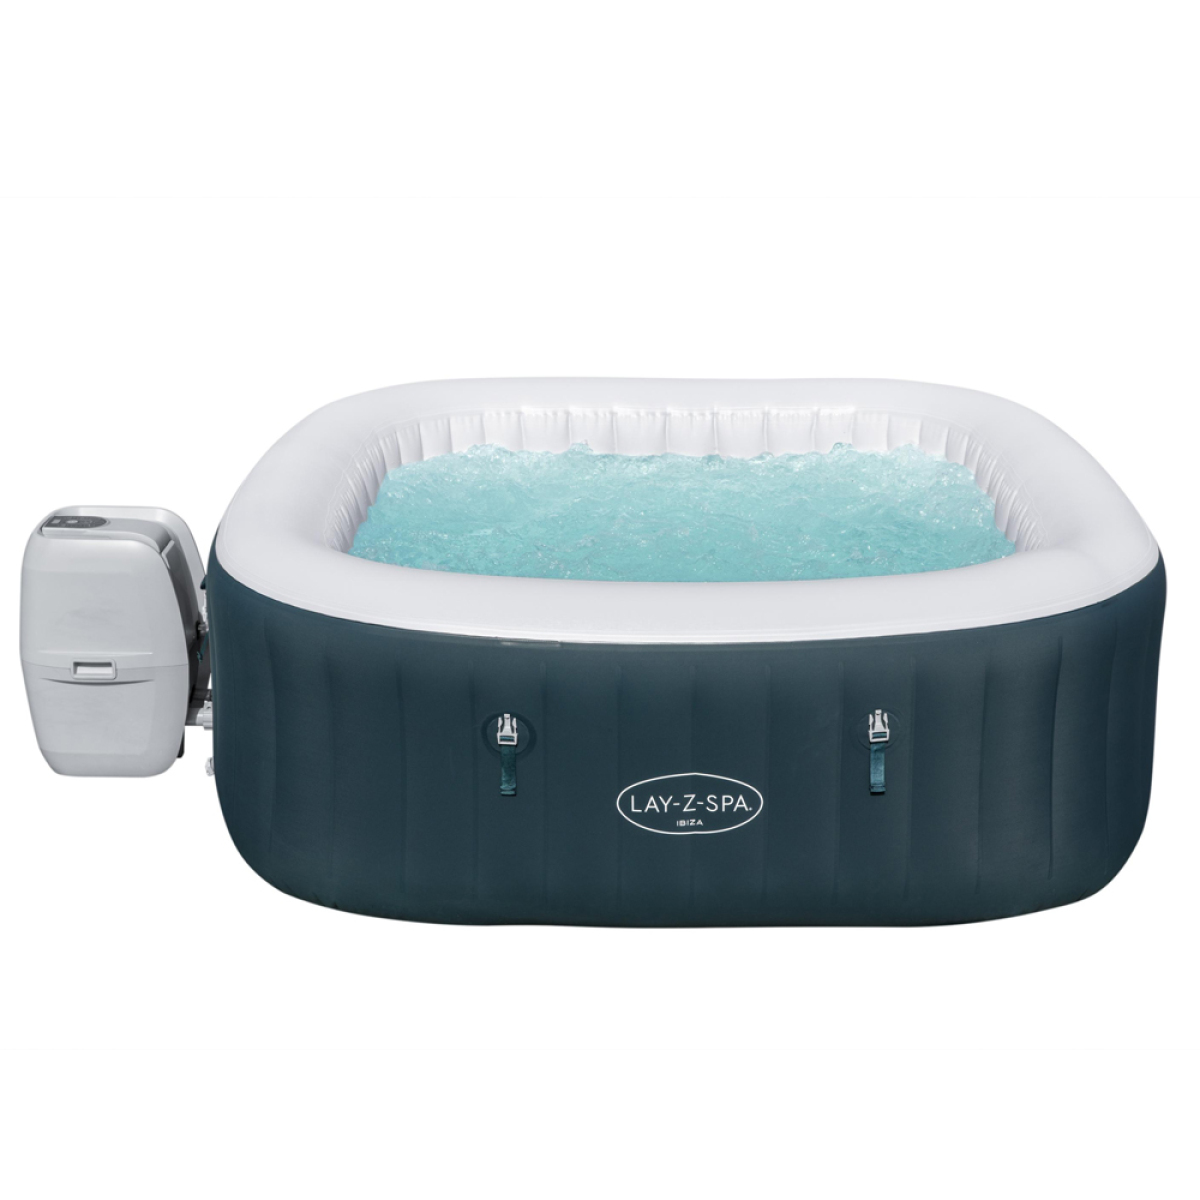 Spa gonflable Bestway Spa gonflable Lay-Z Ibiza AirJet 6 places Bestway square 60015 180x66cm